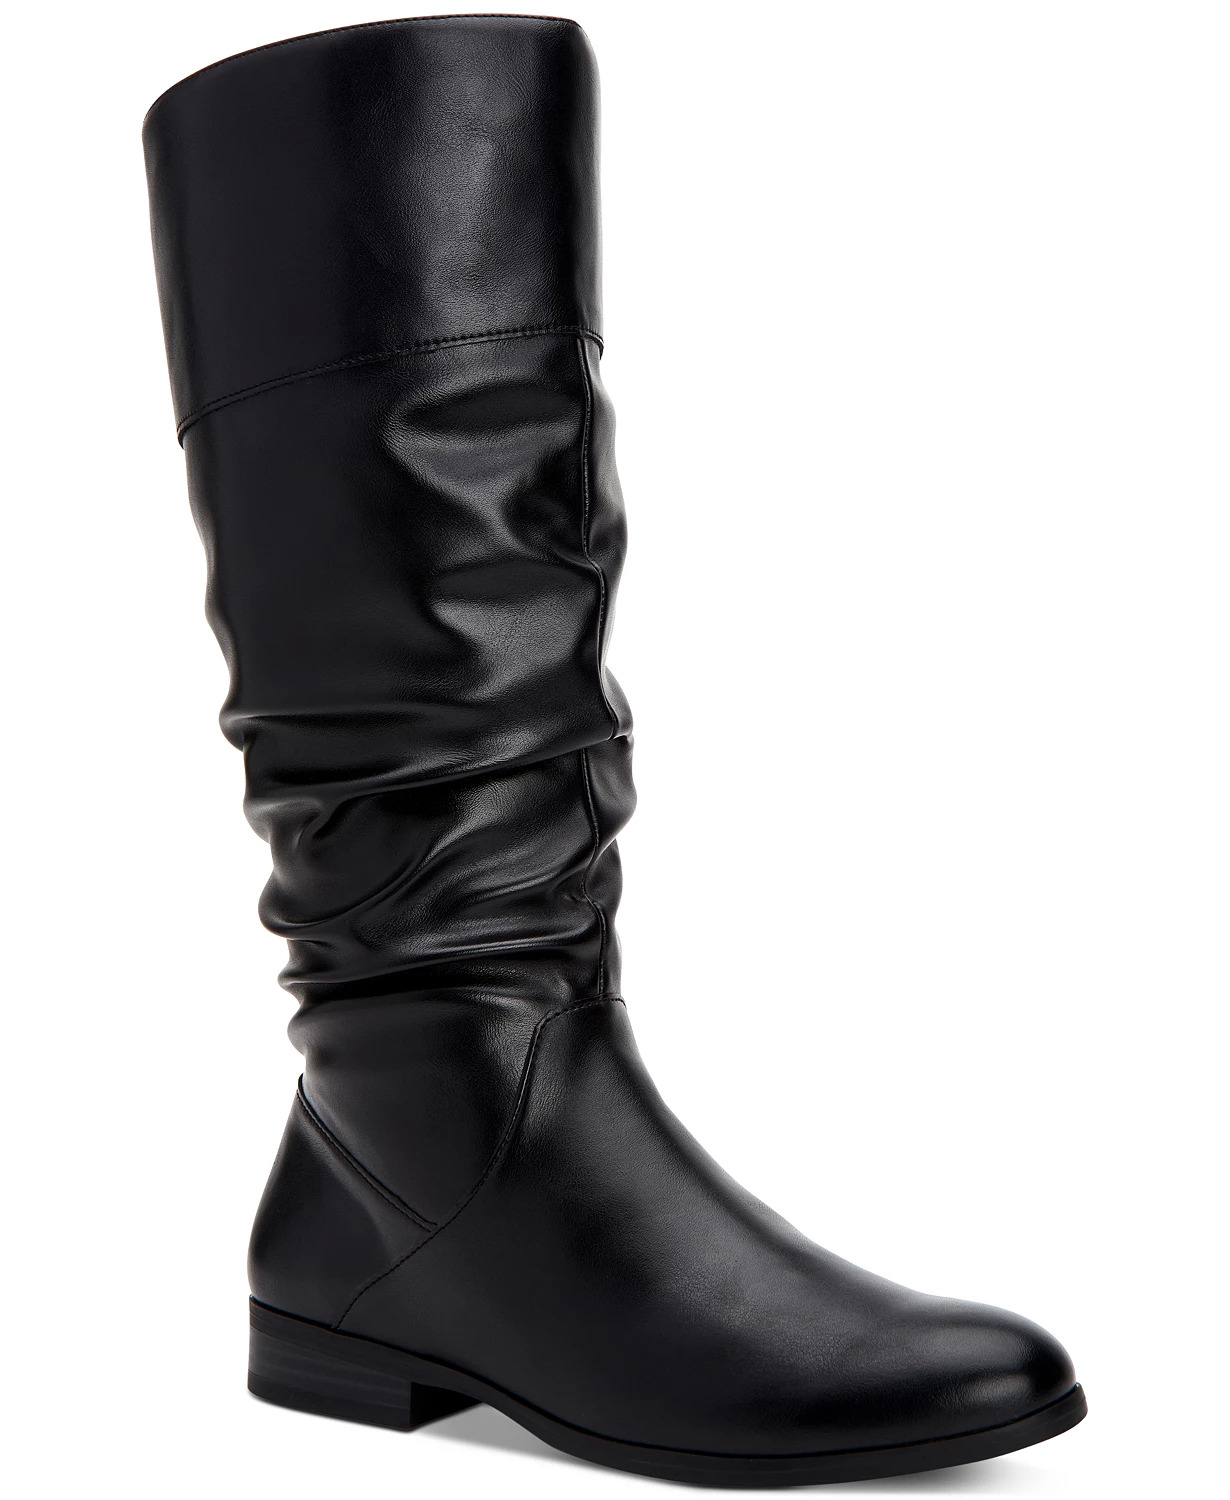 Style & Co Women's Kelimae Scrunched Boots (Reg or Wide-Calf) $18, Style & Co Witty Cold-Weather Boots $18. More + 20% in Slickdeals Cashback + free shipping on $25+